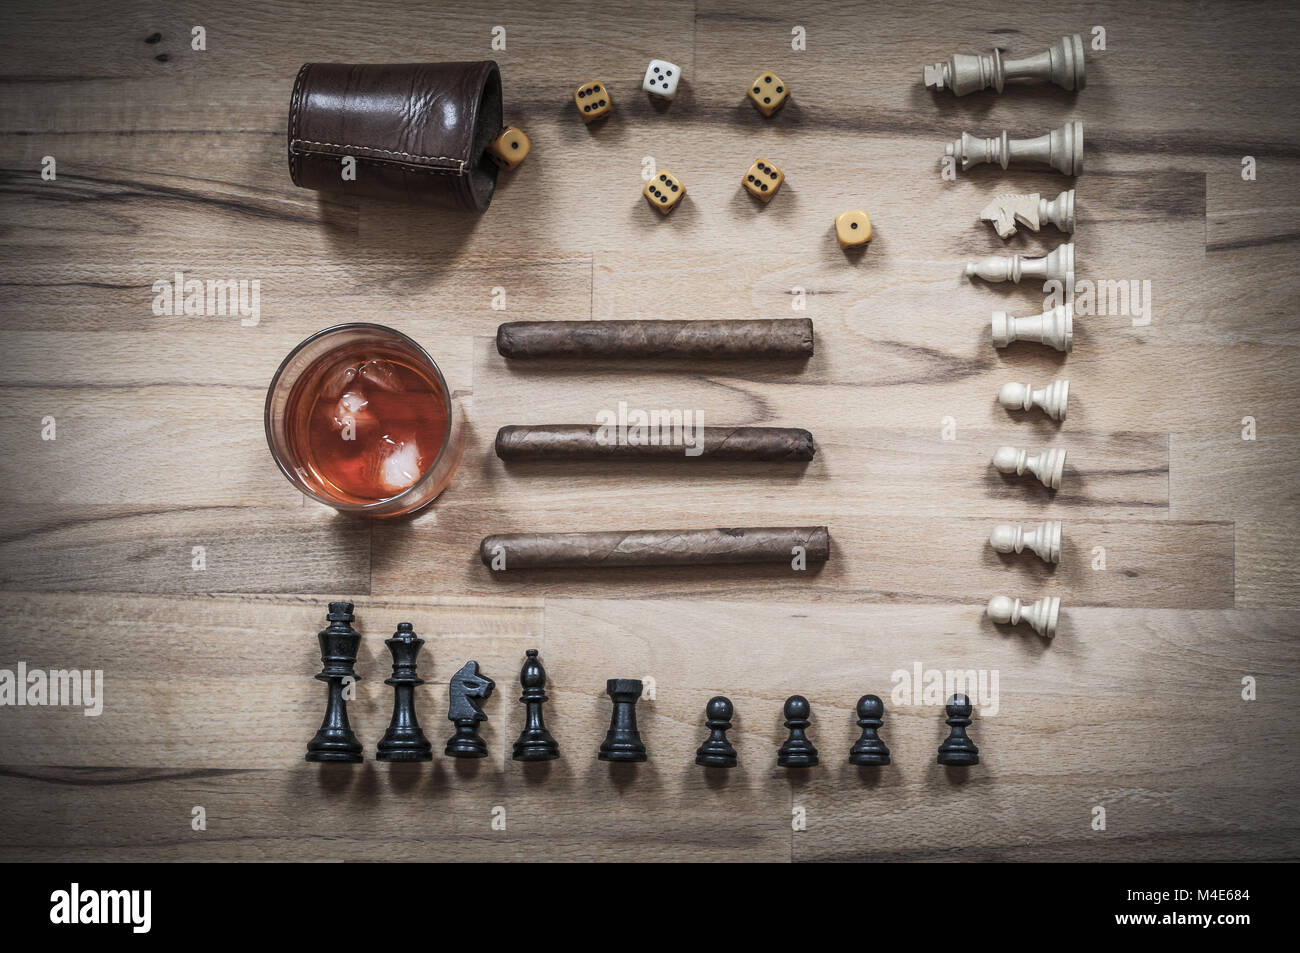 Dice game, chess piece, cigars and alcoholic beverages Stock Photo